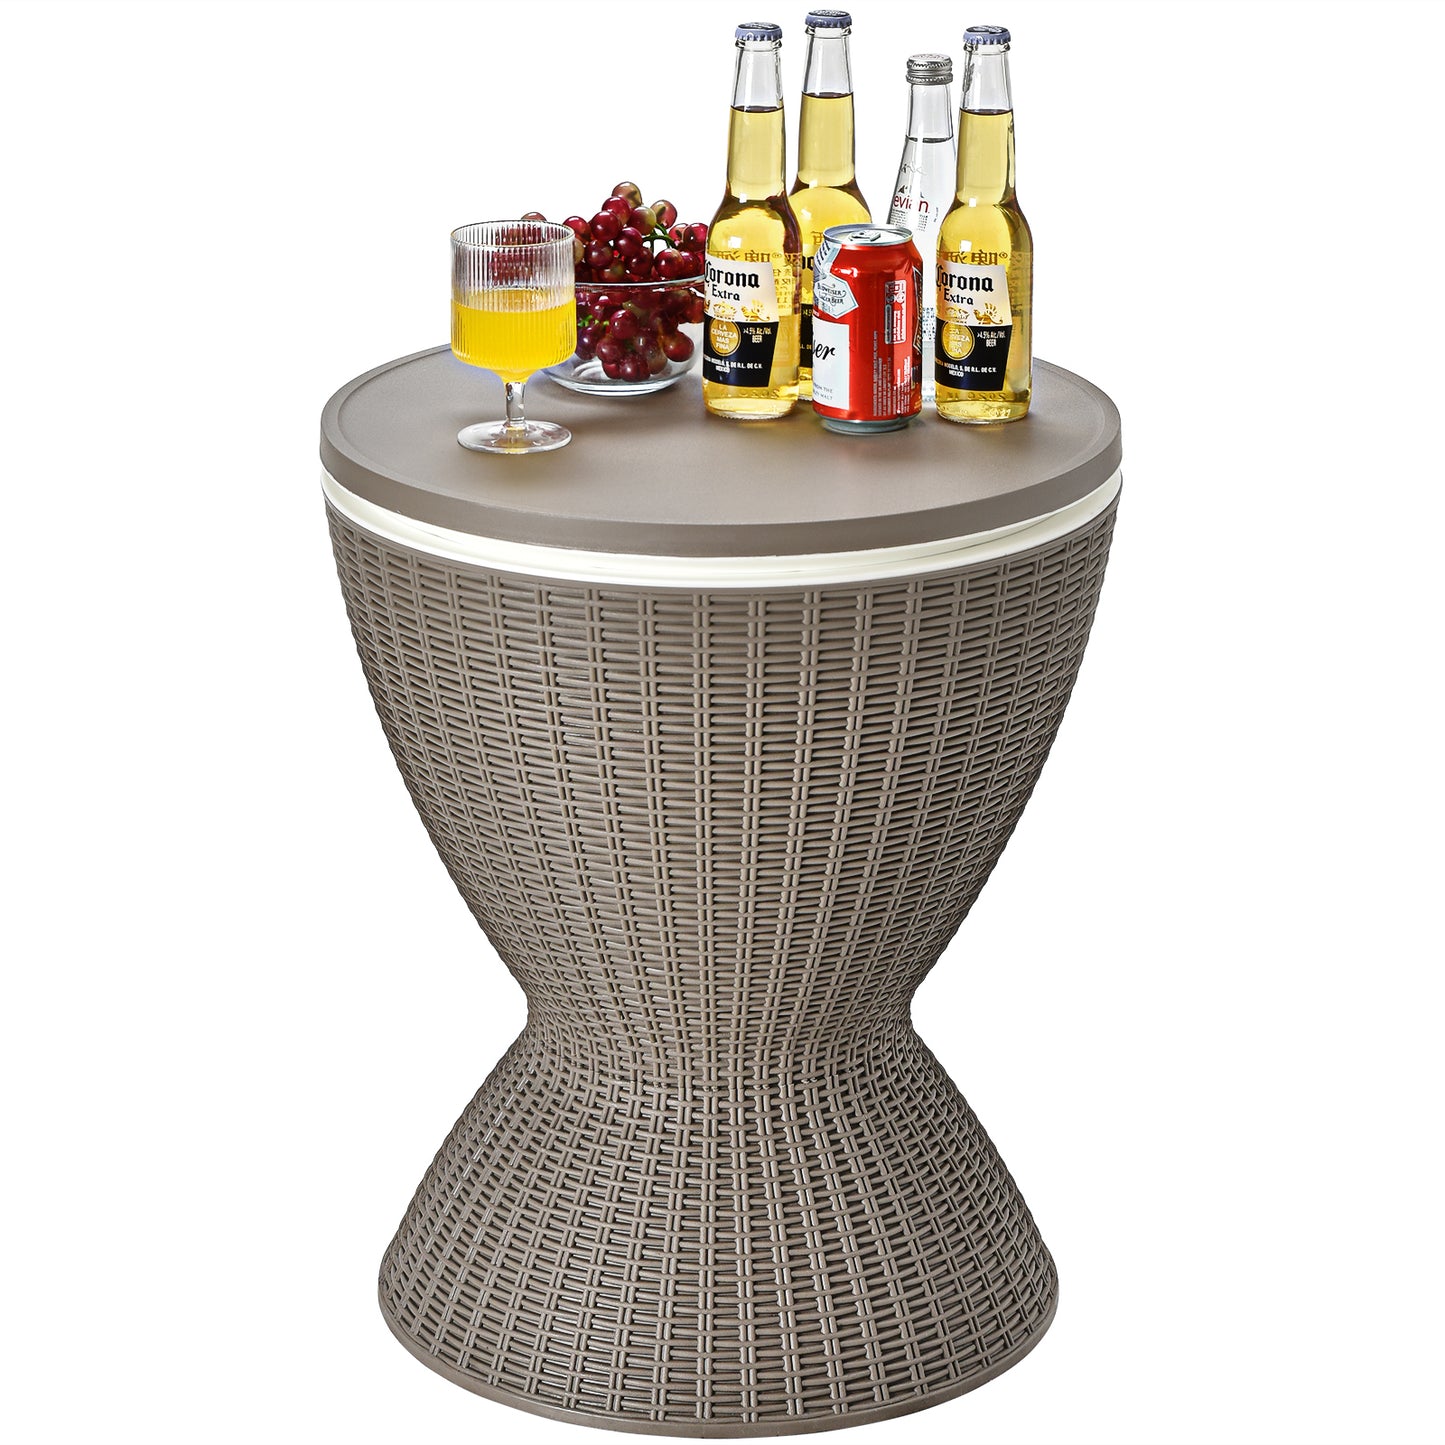 3 in 1 8 Gallon Patio Rattan Cooler Bar Table with Adjust Ice Bucket-Brown